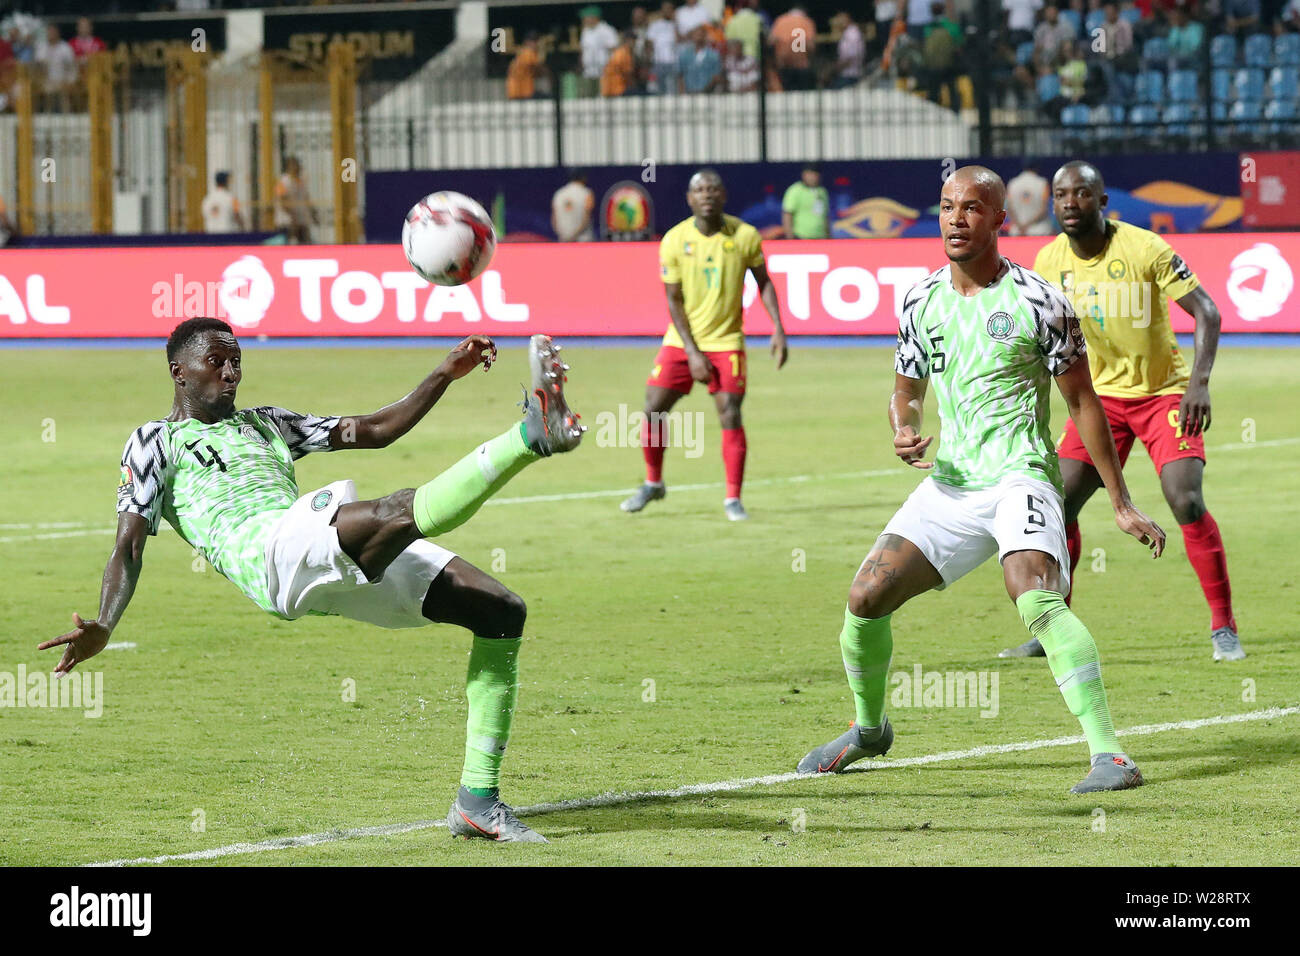 Alexandria, Egypt. 6th July, 2019. Wilfred Onyinye Ndidi (1st L) of Nigeria competes during the round of 16 match between Nigeria and Cameroon at the 2019 African Cup of Nations in Alexandria, Egypt, July 6, 2019. Credit: Wang Teng/Xinhua/Alamy Live News Stock Photo